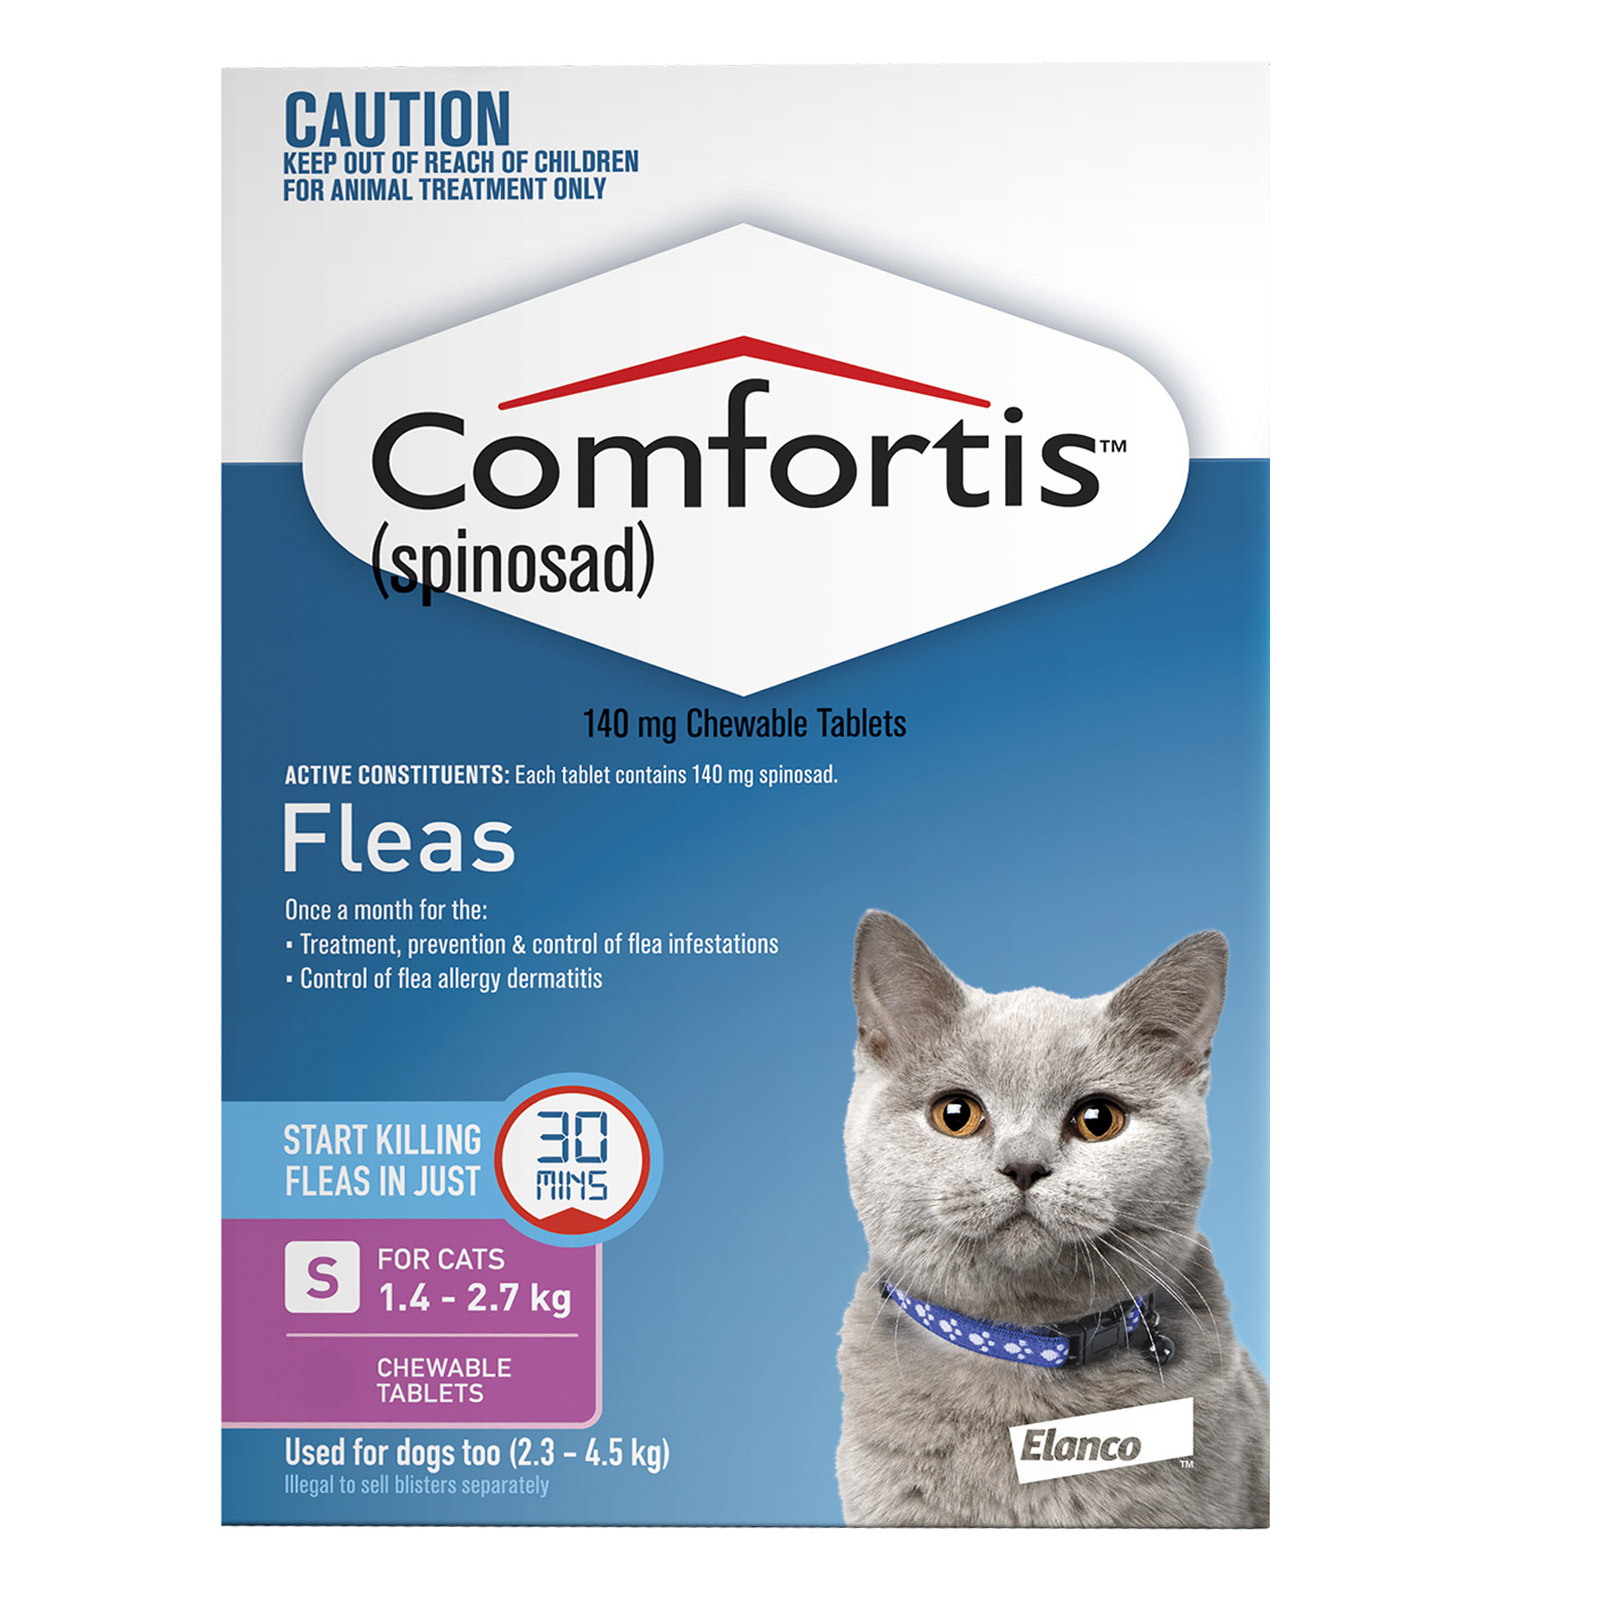 Cheap Comfortis for Cats Buy Comfortis Chewable Flea Tablets for Cats